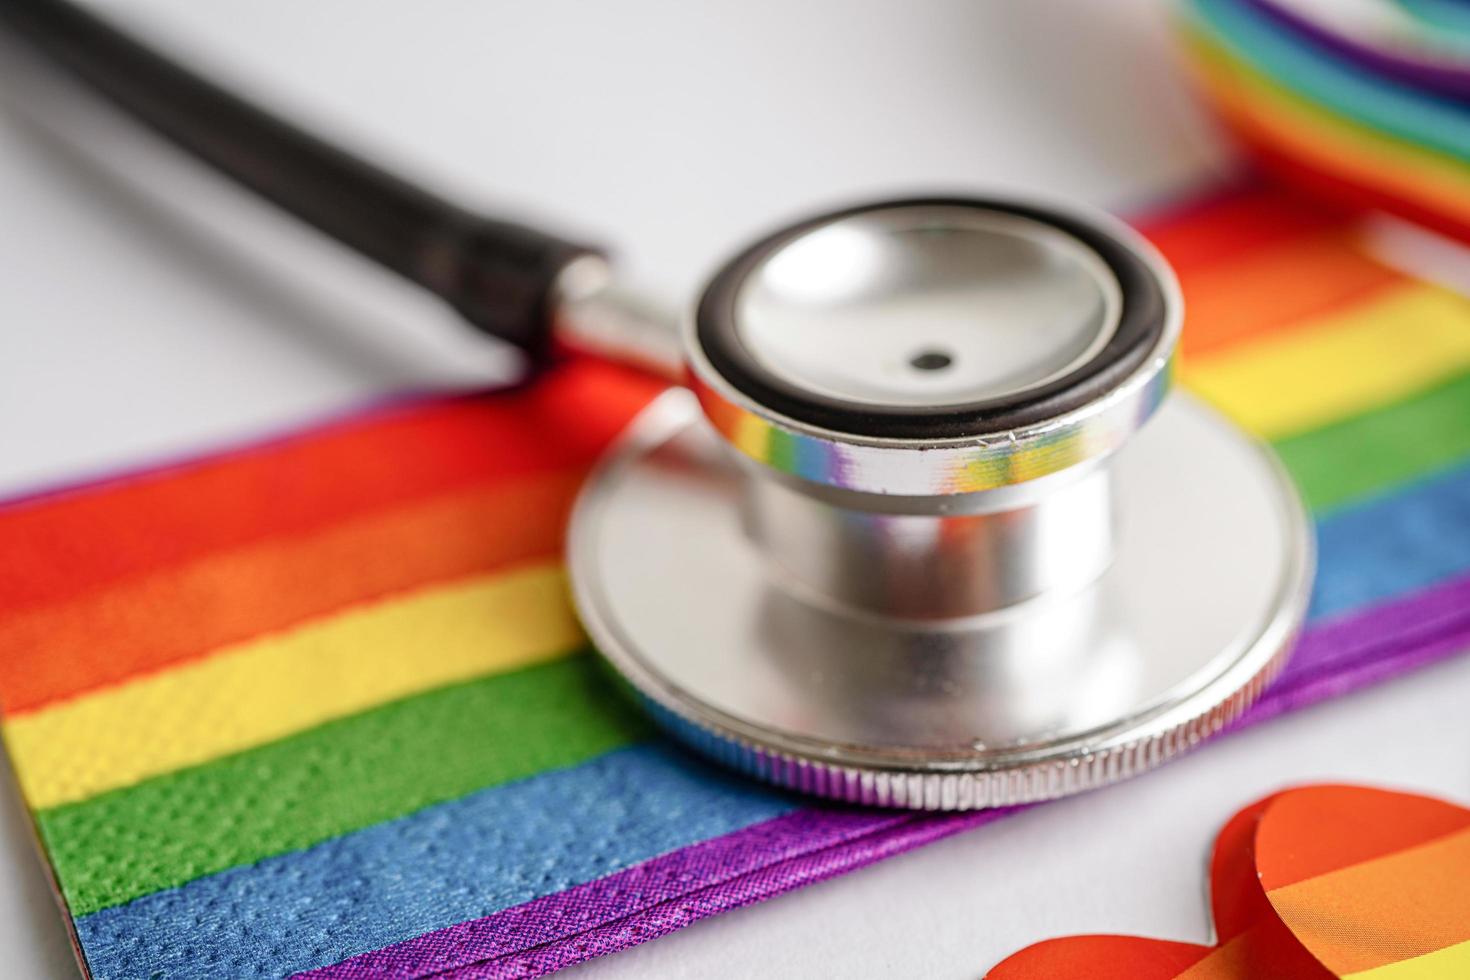 Black stethoscope on rainbow flag background, symbol of LGBT pride month celebrate annual in June social photo